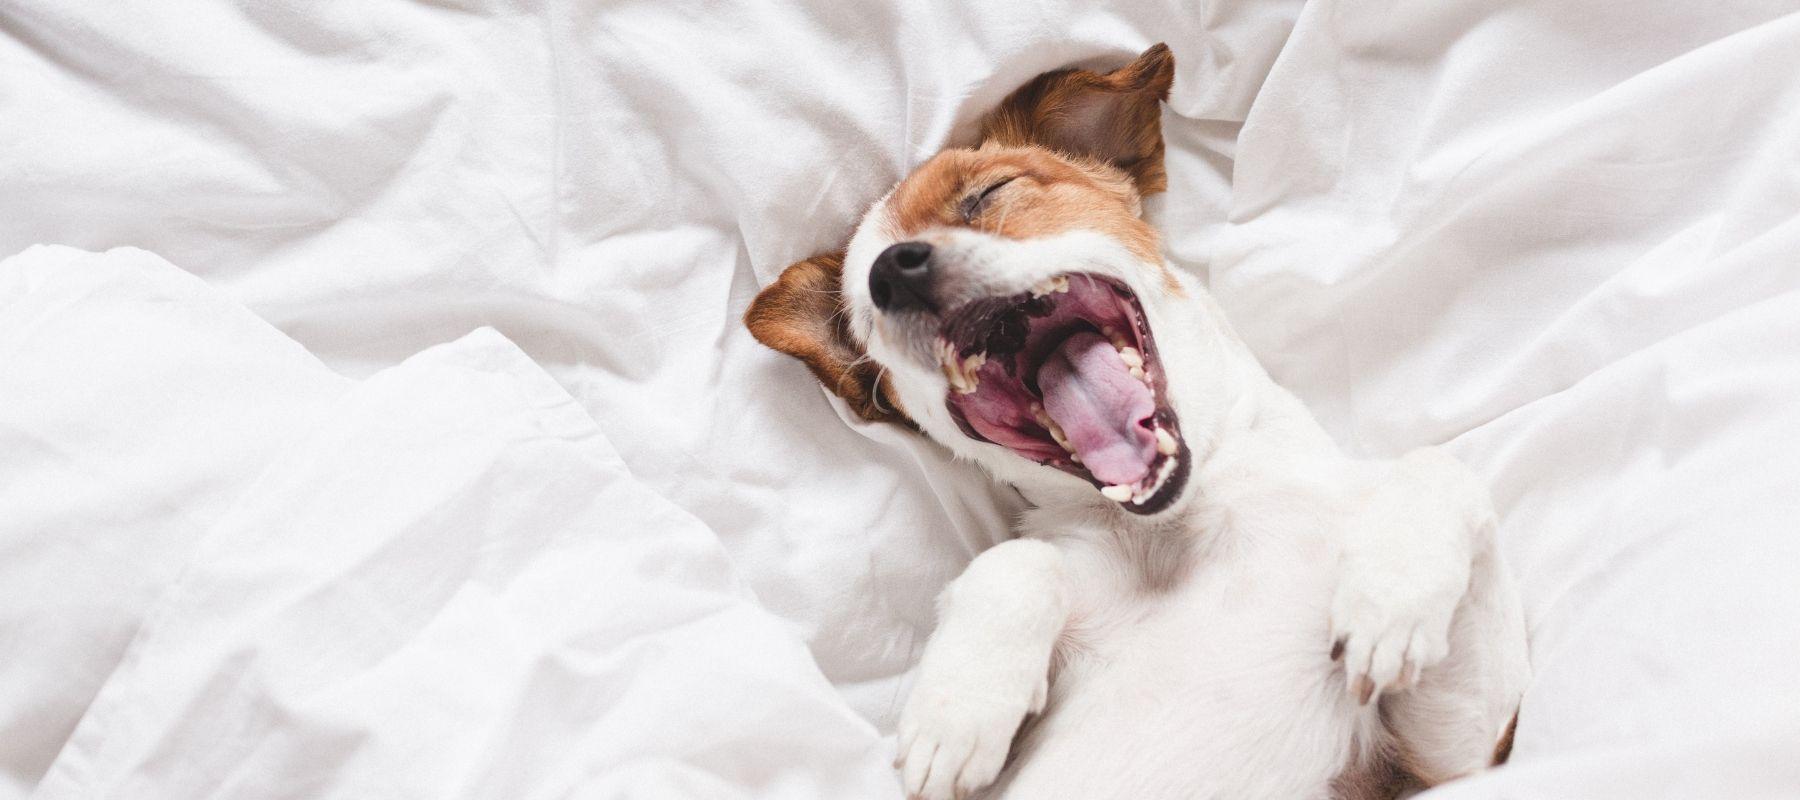 Puppy yawning on bed